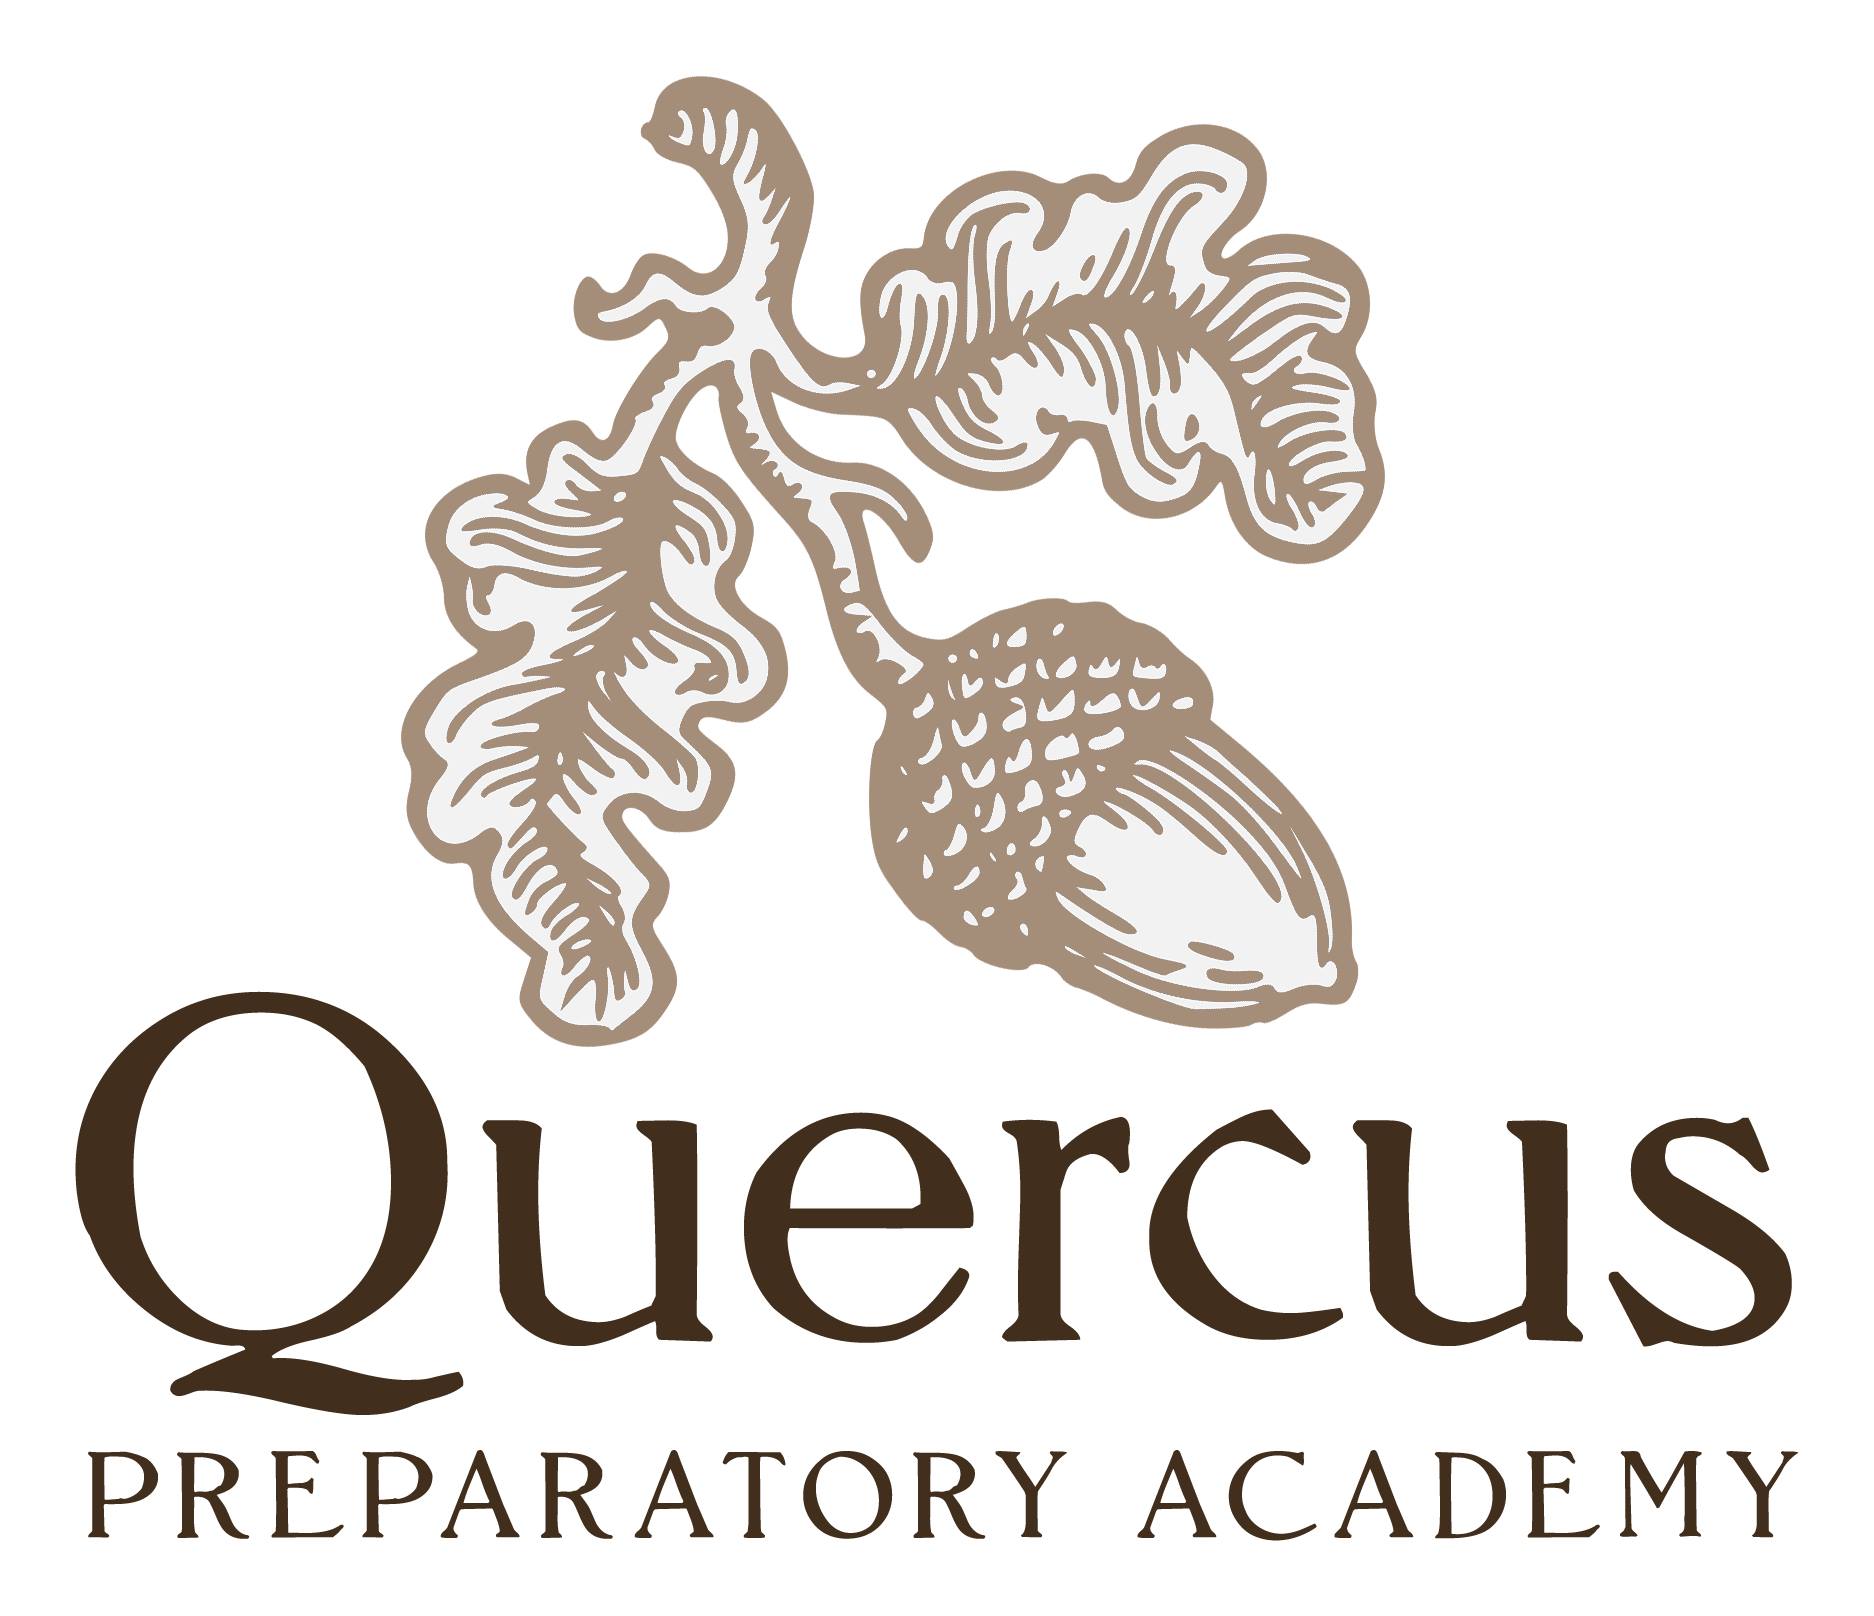 Our school logo: Quercus Preparatory Academy, with an acorn and oak leaves.